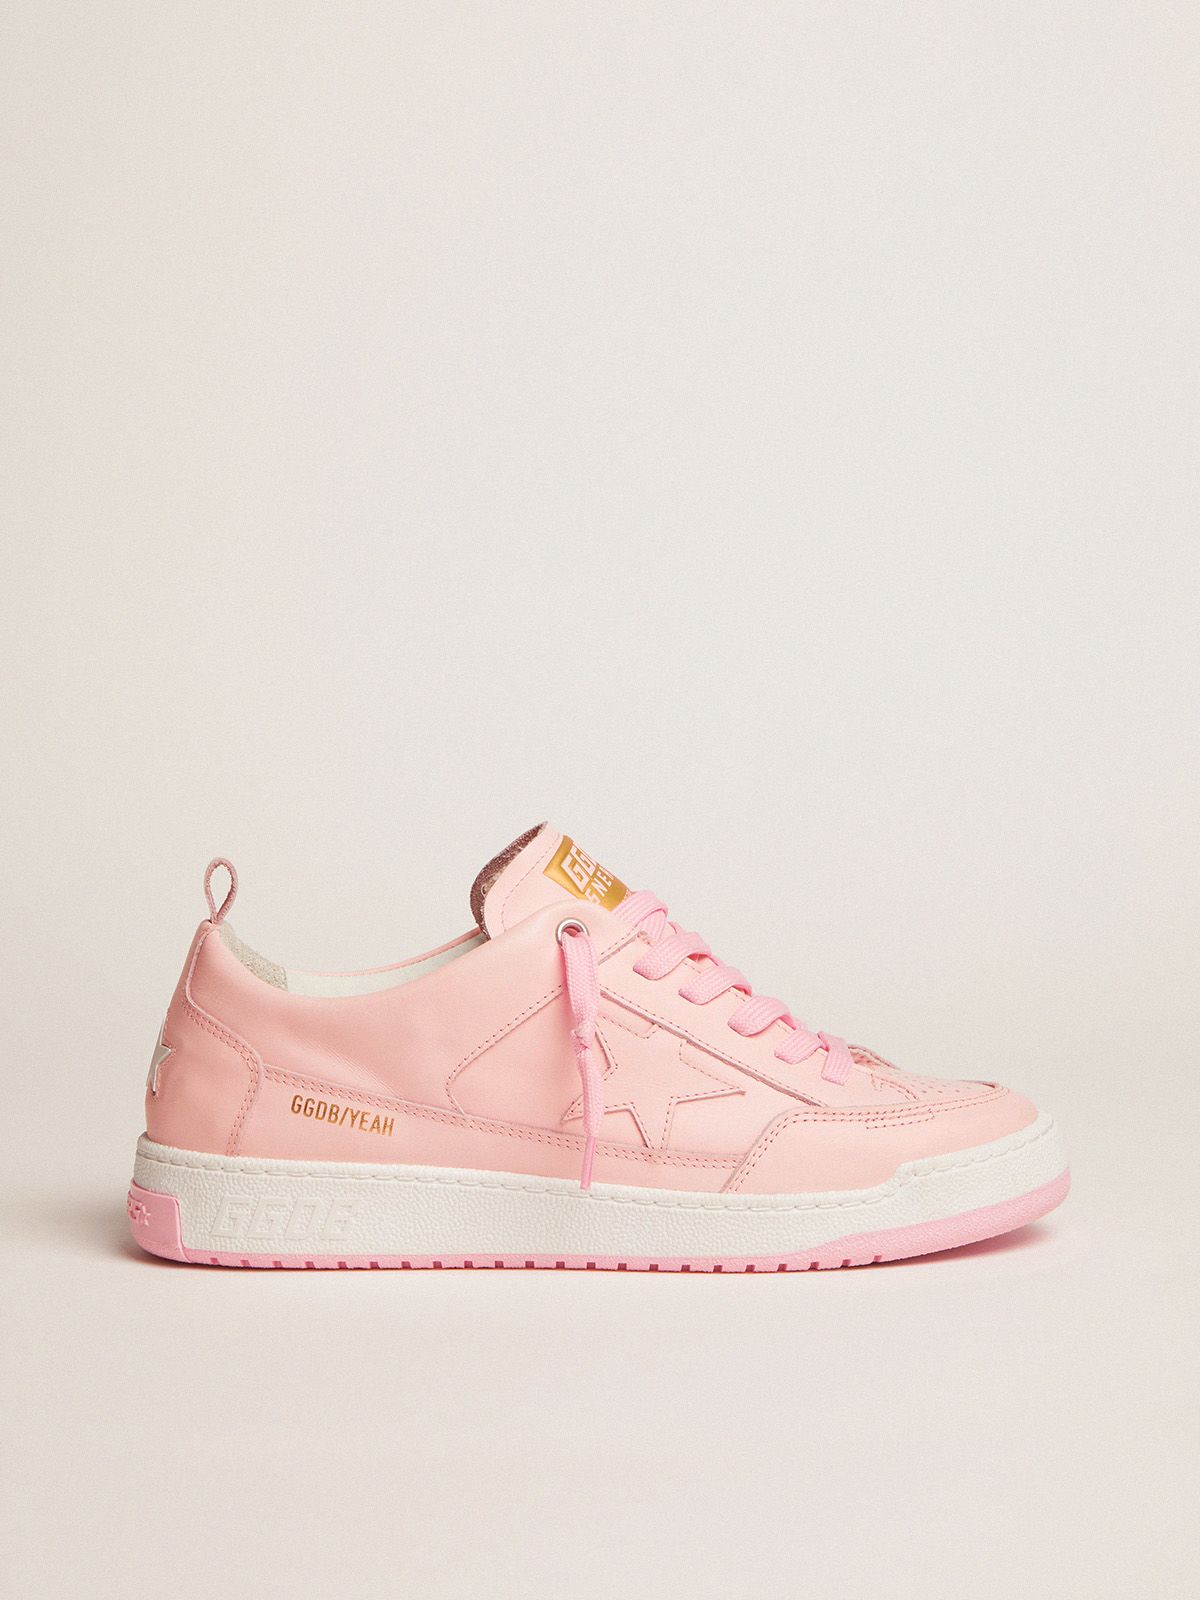 golden goose Yeah leather sneakers in pale pink